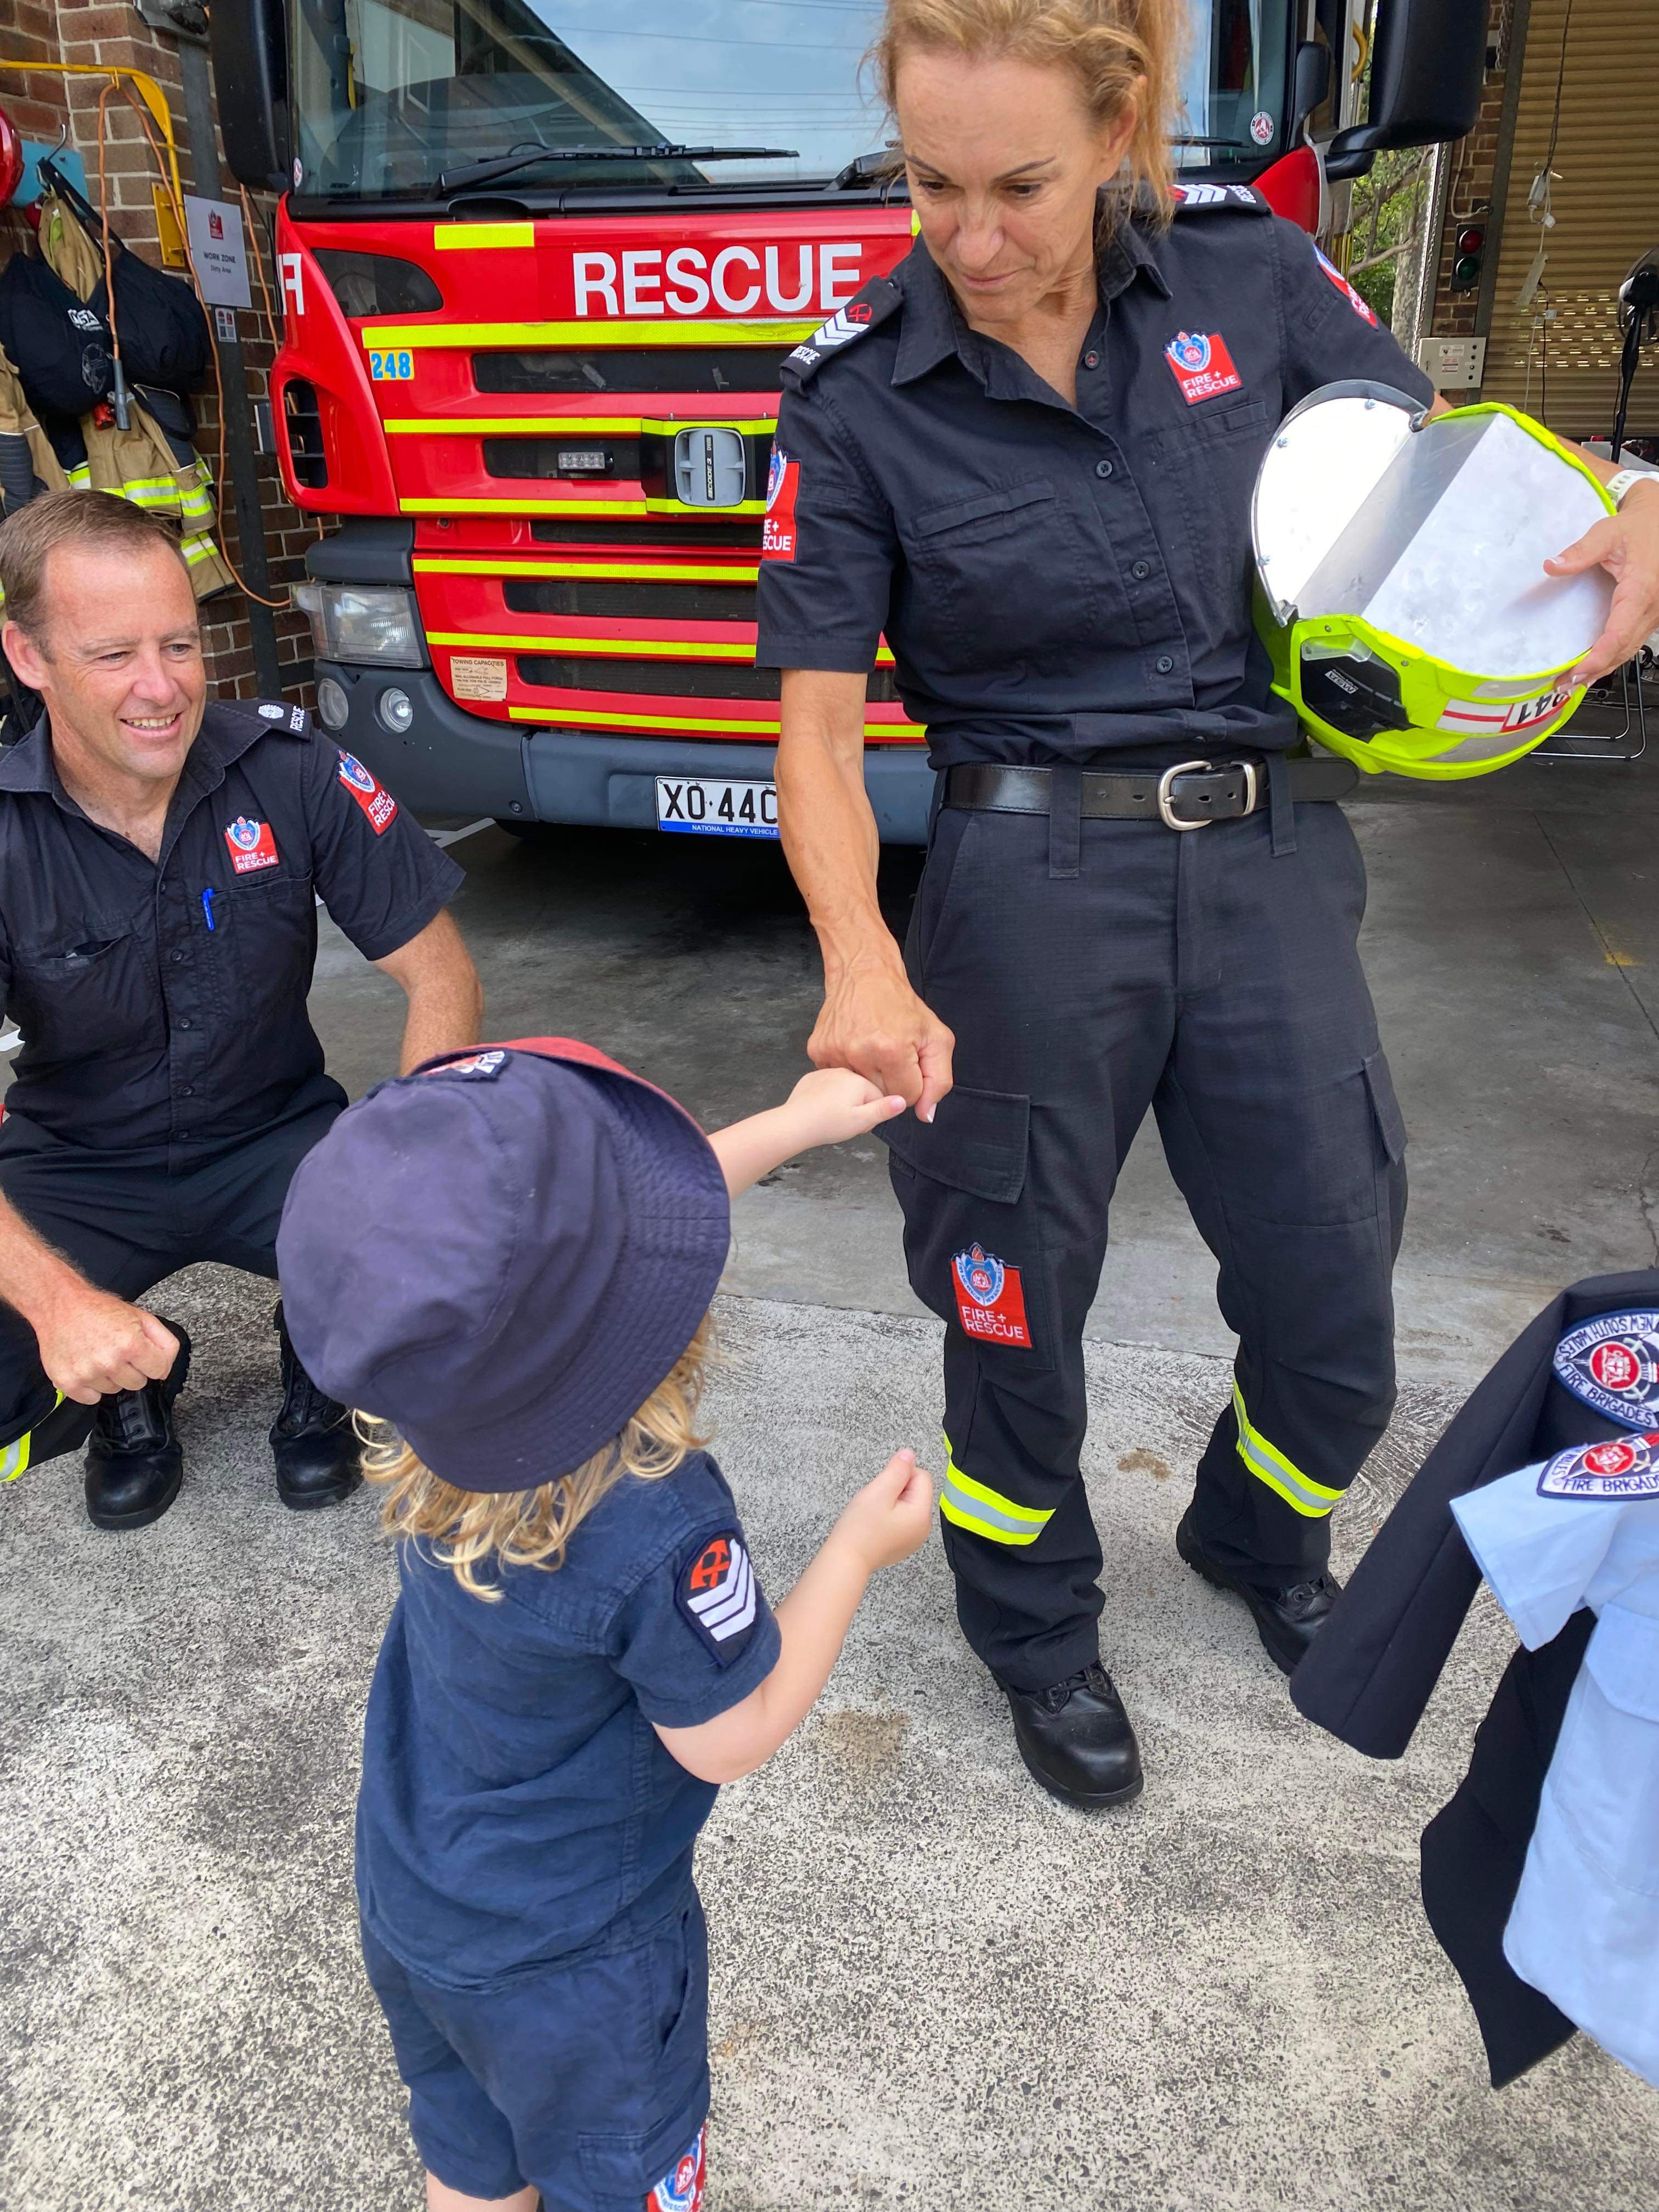 Blonde haired 4-year-old giving female firefighter a fist pump